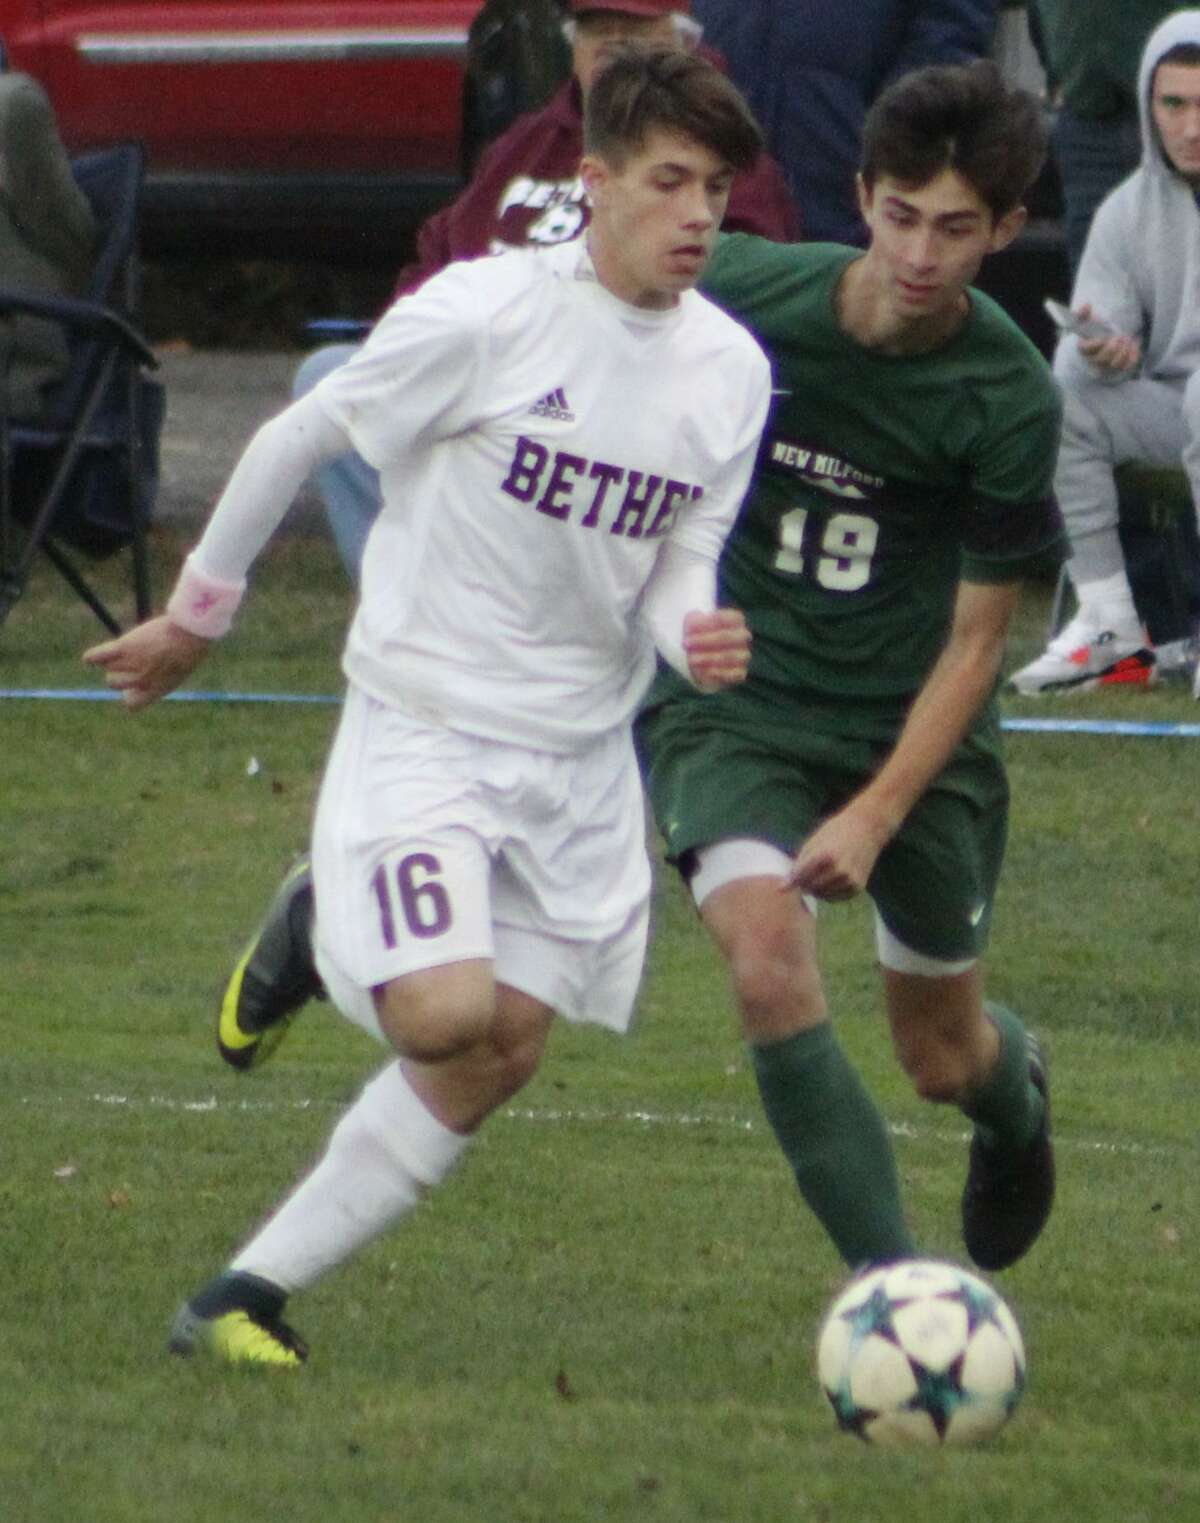 Bethel's Bryan Osebio, left, dribbles the ball upfield as New Milford's Erik Byrnes defends during the South-West Conference quarterfinal boys soccer game at Rourke Field in Bethel Oct. 27, 2017.